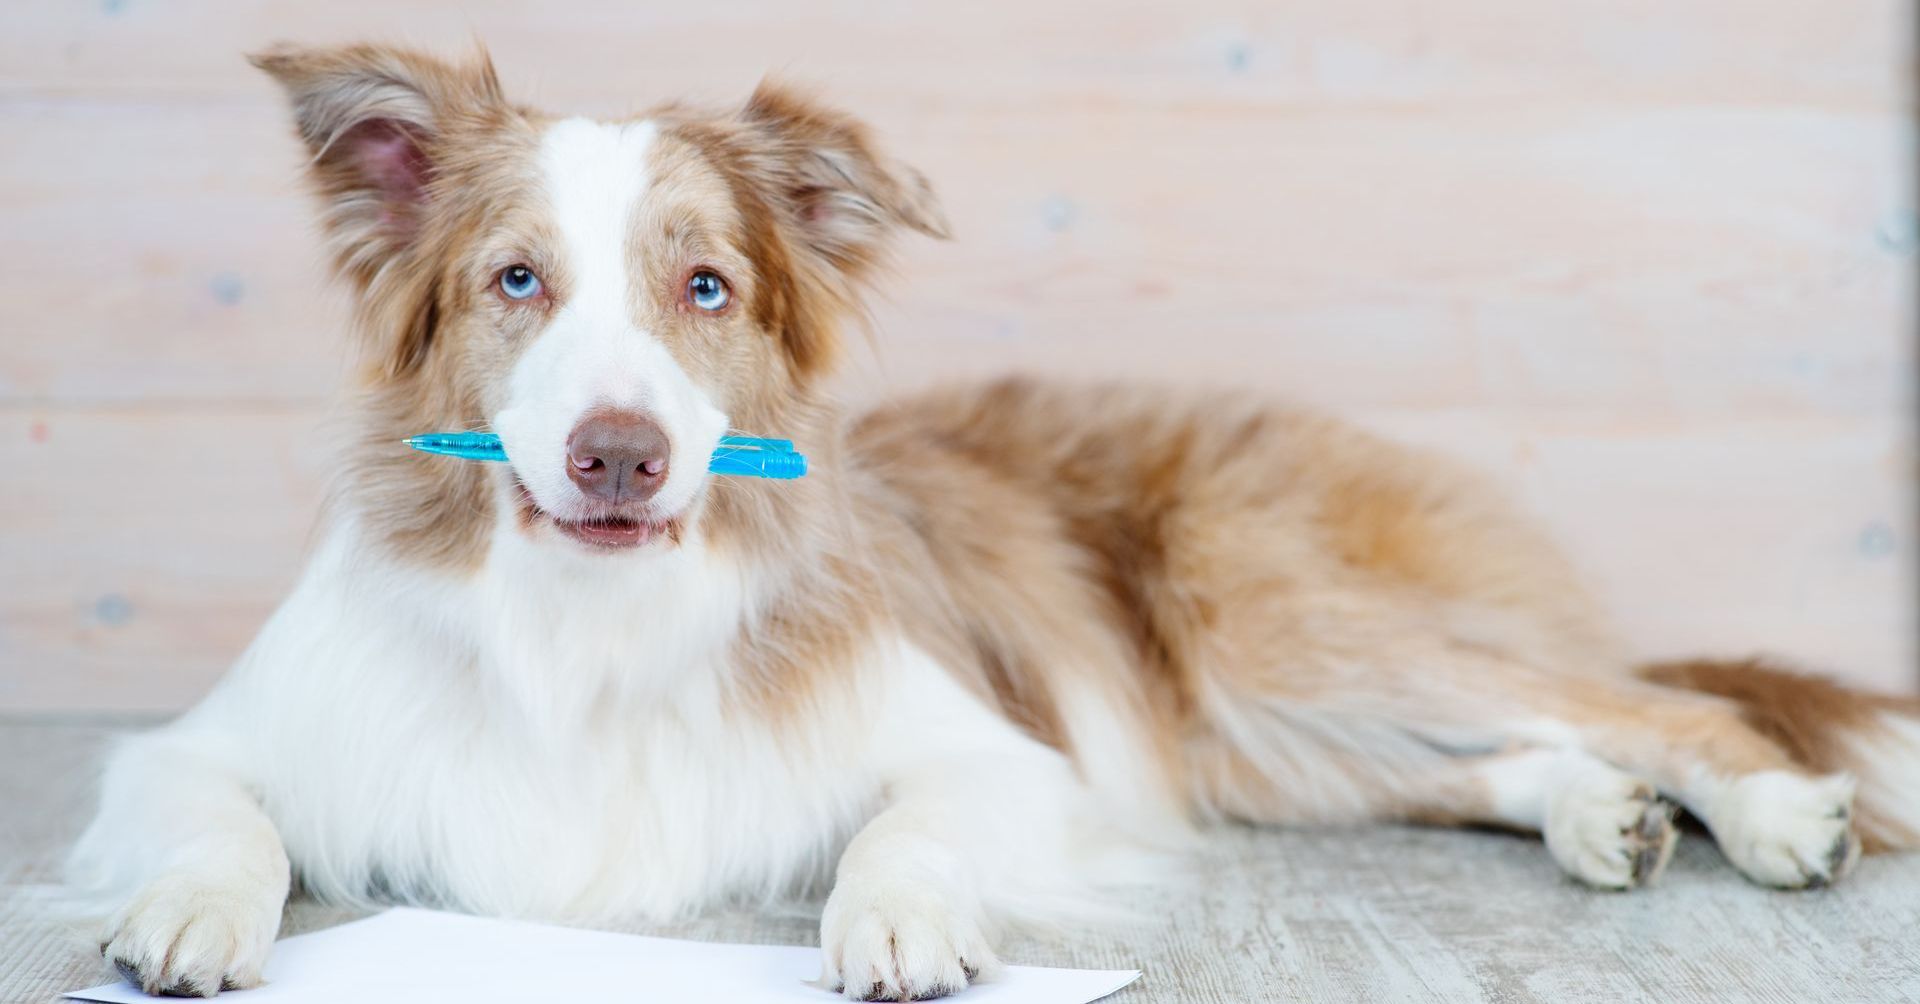 Long haired dog with blue eyes holding a pencil in his mouth and paper under his paw